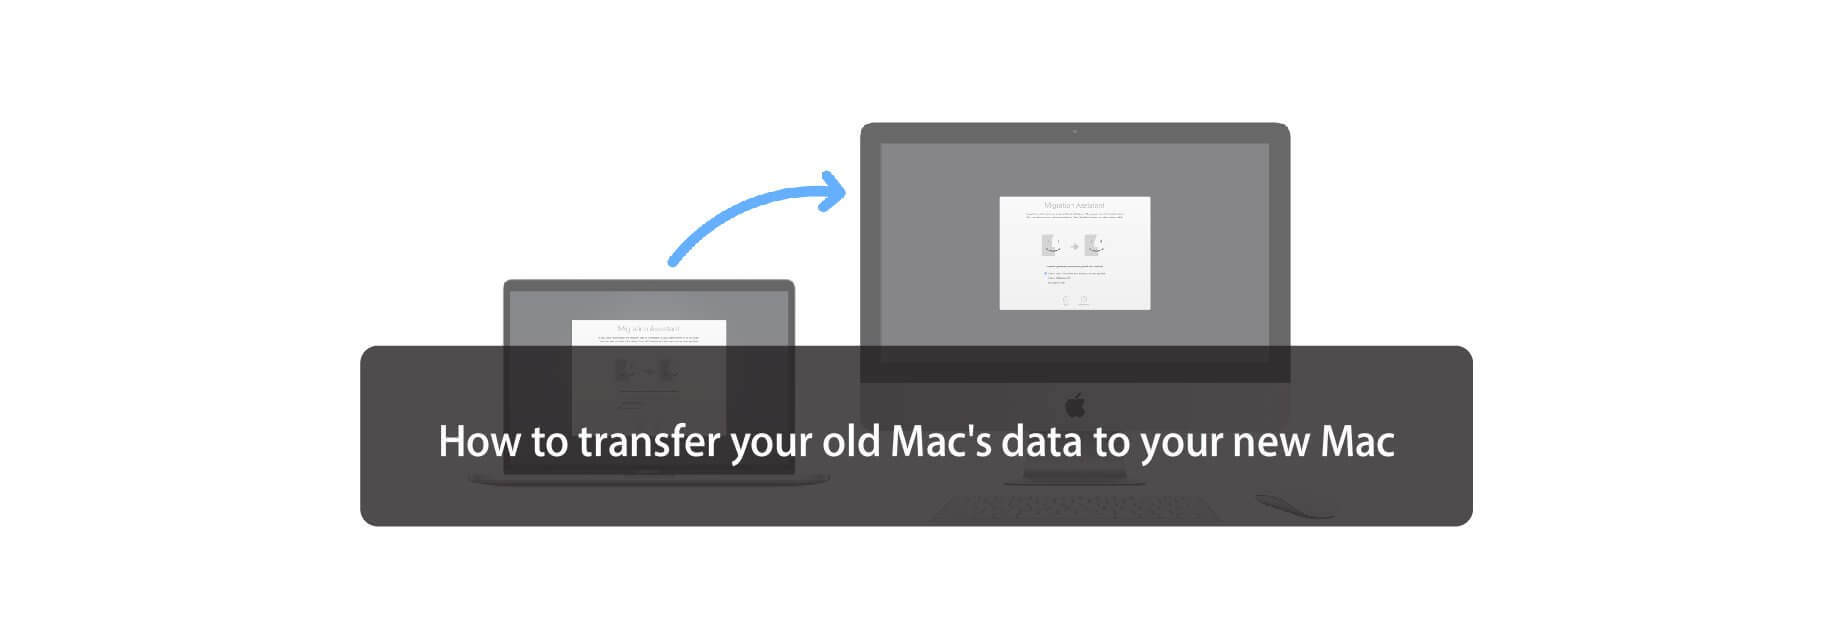 How to transfer your old Mac's data to your new Mac